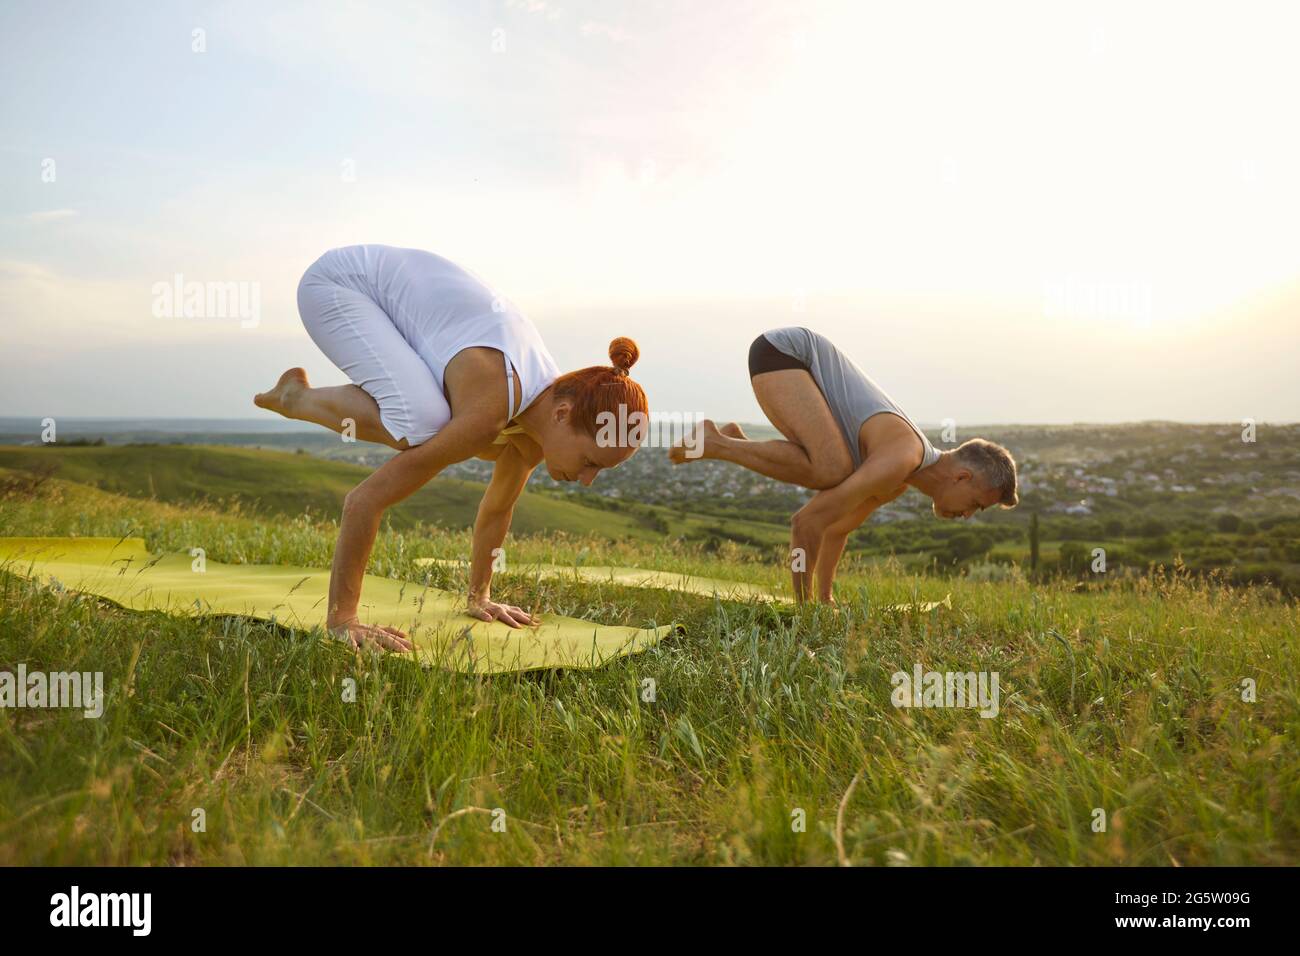 Couple doing bakasana position and practicing yoga together on nature outdoors Stock Photo